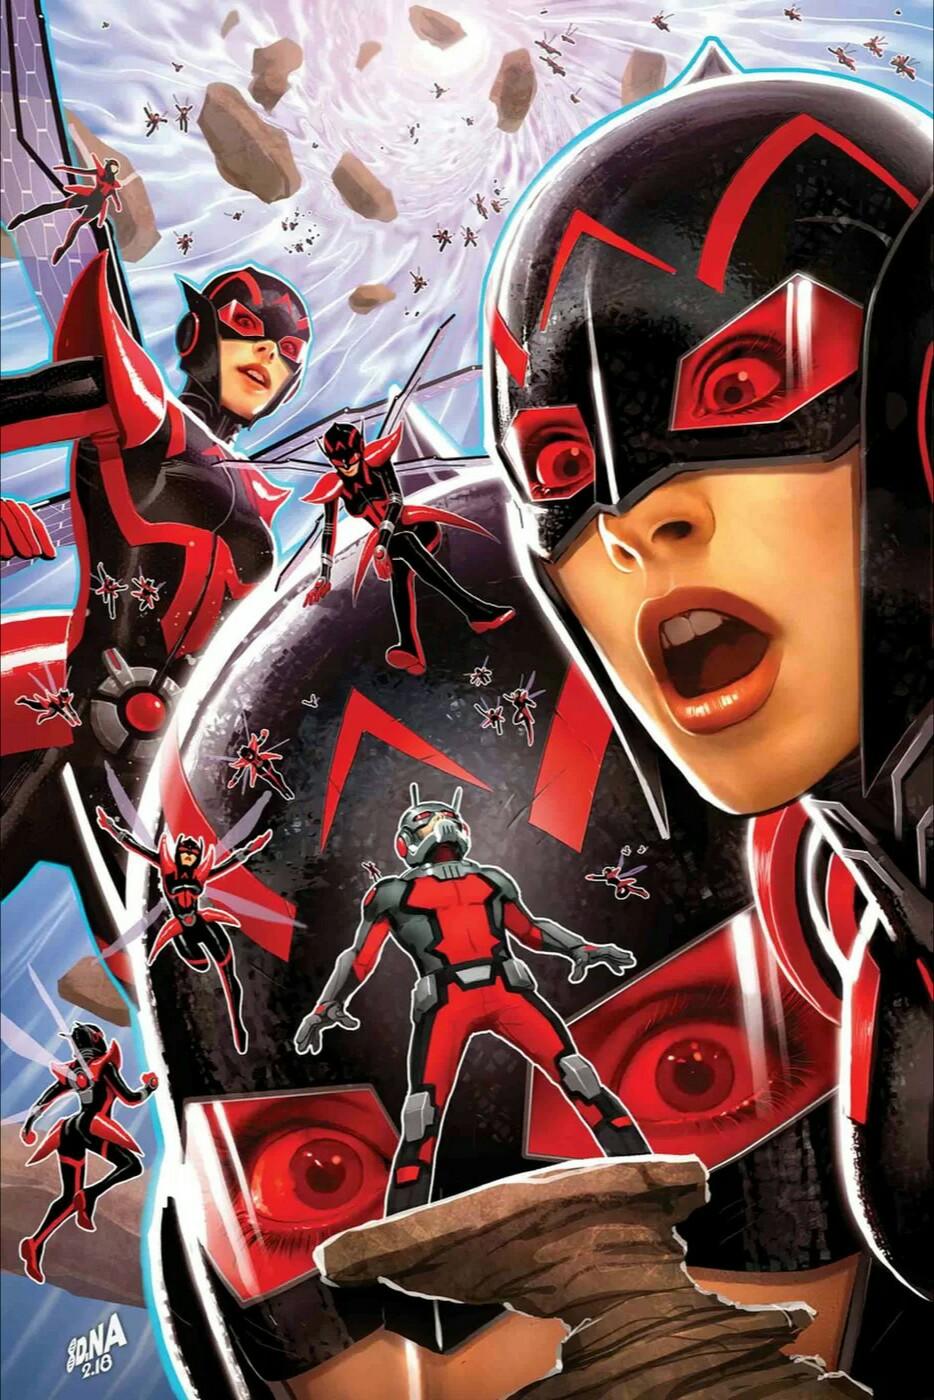 Ant-Man and the Wasp Vol. 1 #2